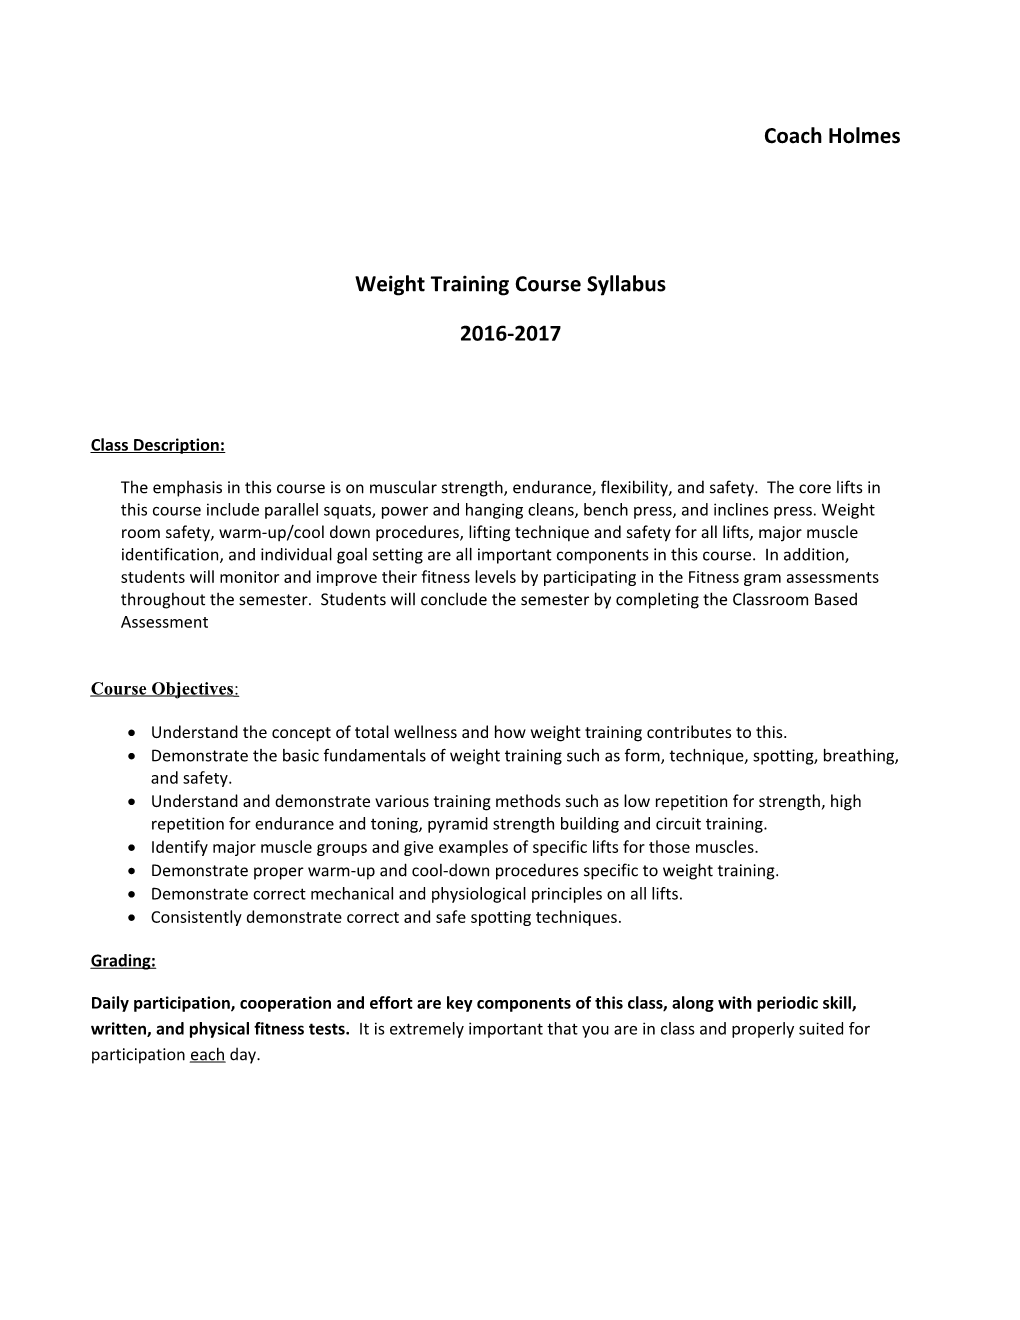 Weight Training Course Syllabus